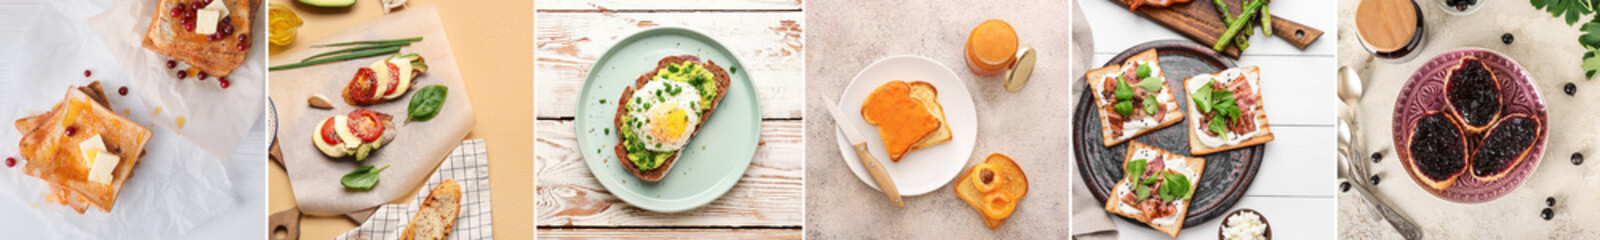 Set of tasty toasts with egg, avocado, bacon, cheese and jams on light background, top view